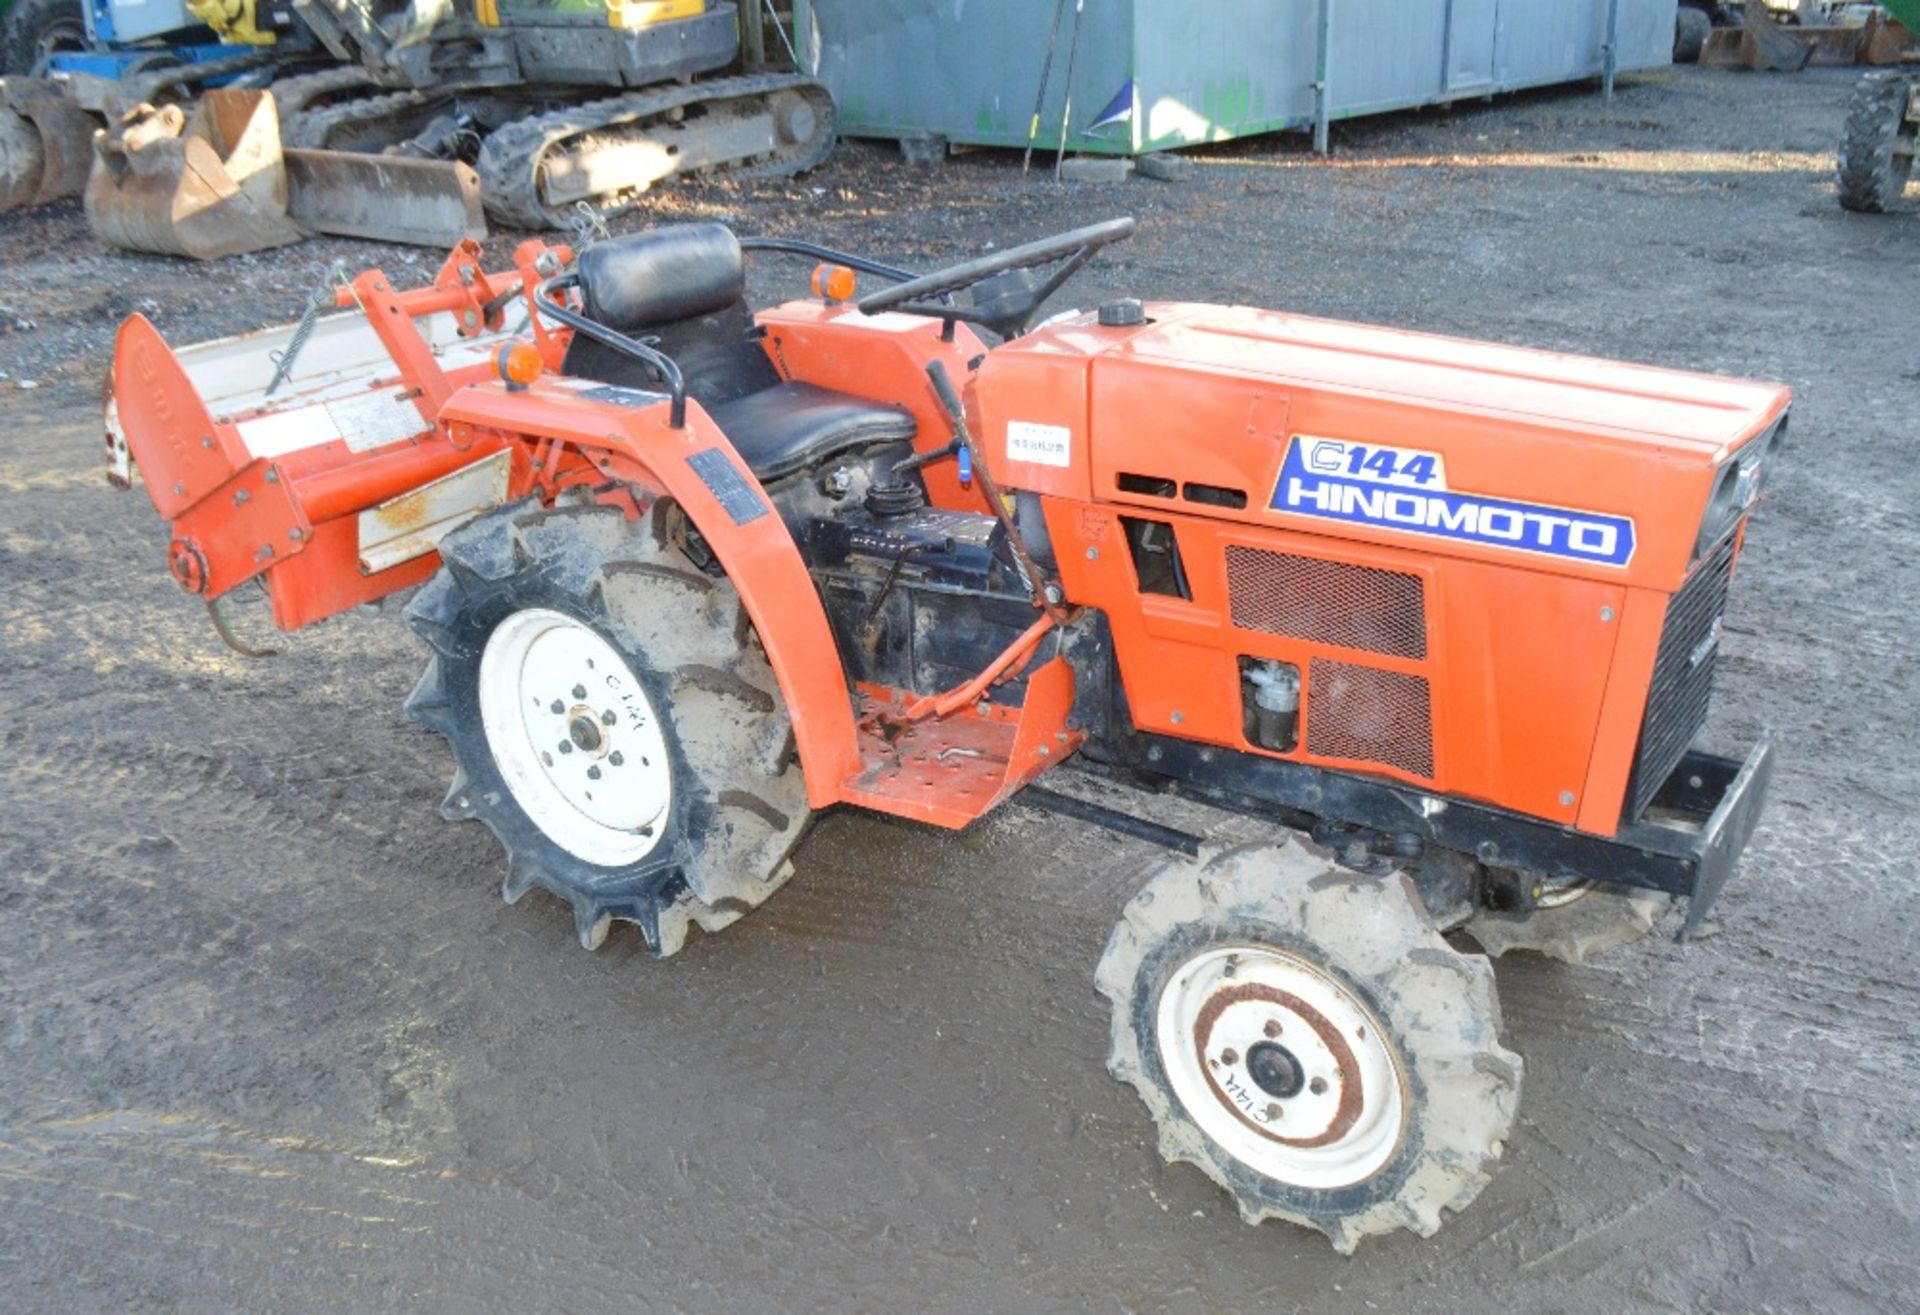 Hinomoto C144 diesel driven 4wd compact tractor - Image 7 of 19